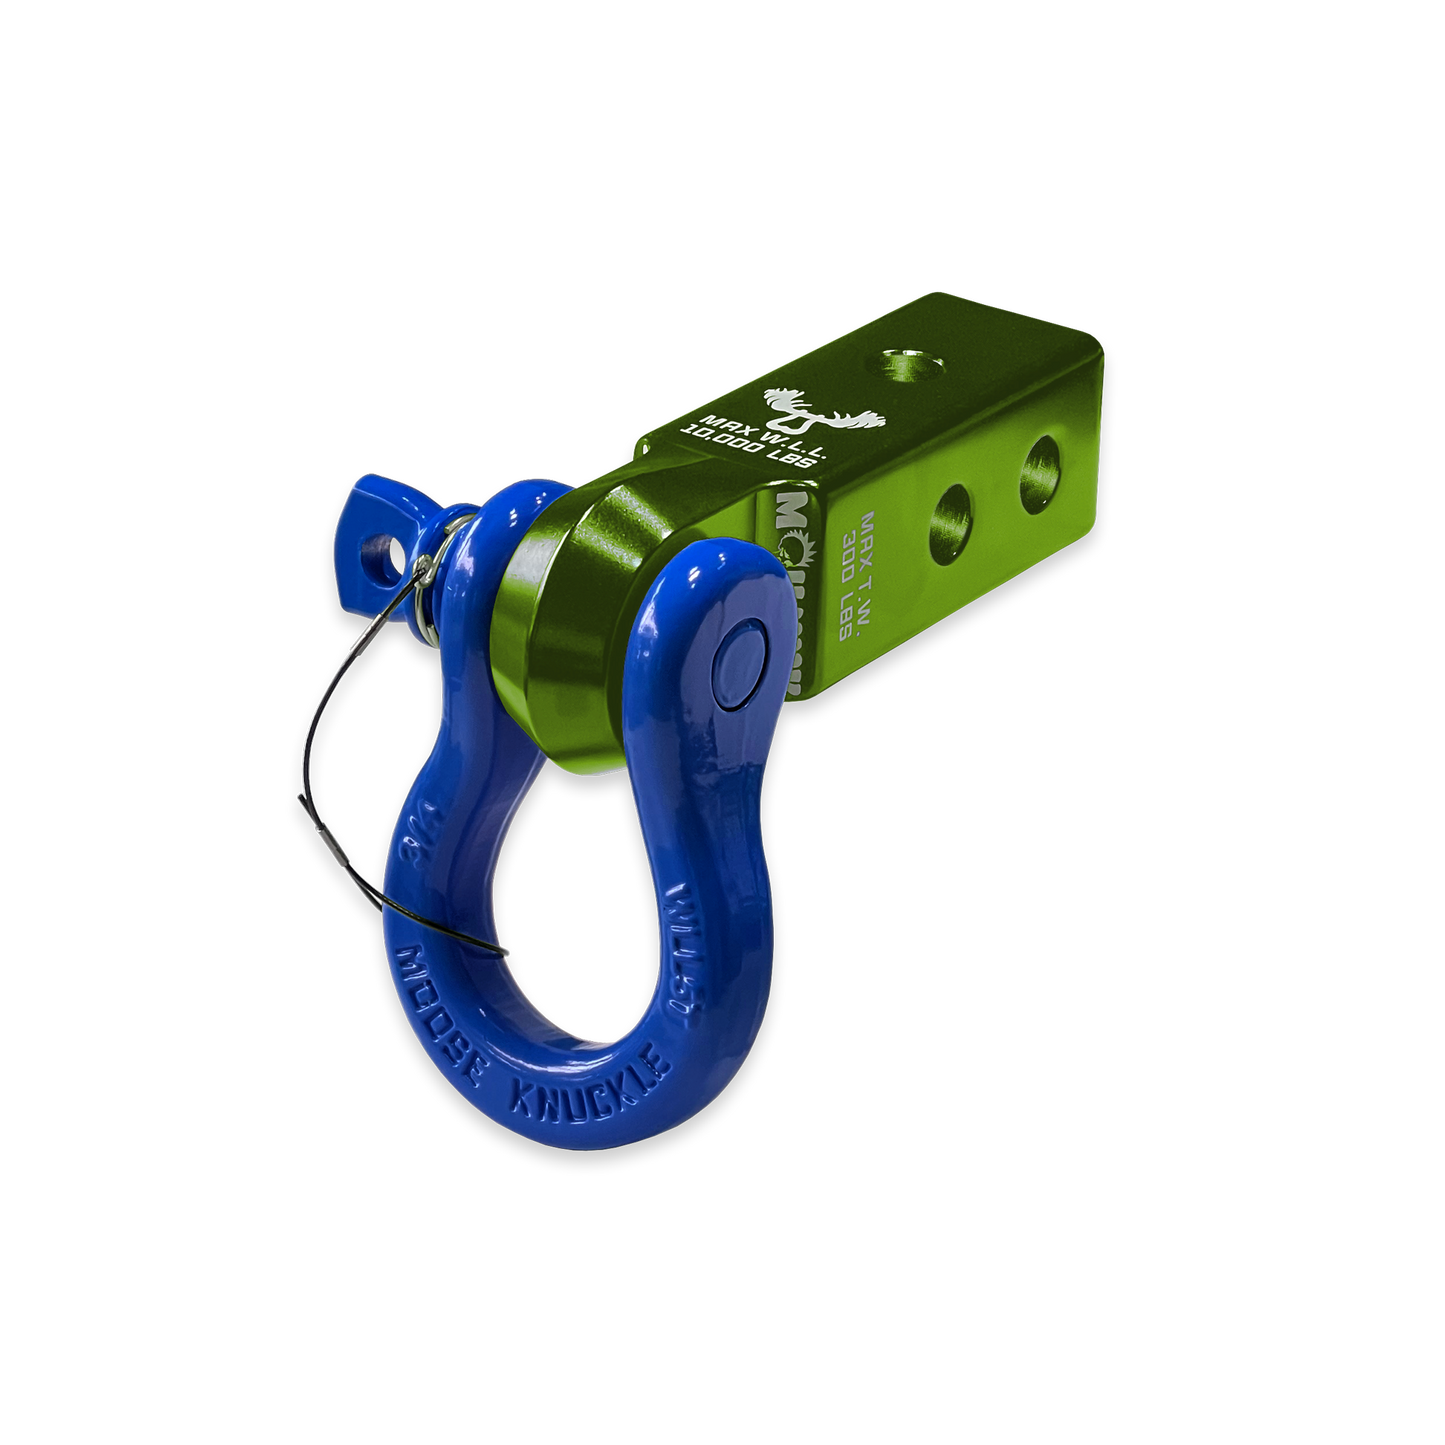 B'oh 3/4 Pin Shackle & 2.0 Receiver (Bean Green and Blue Balls Combo)